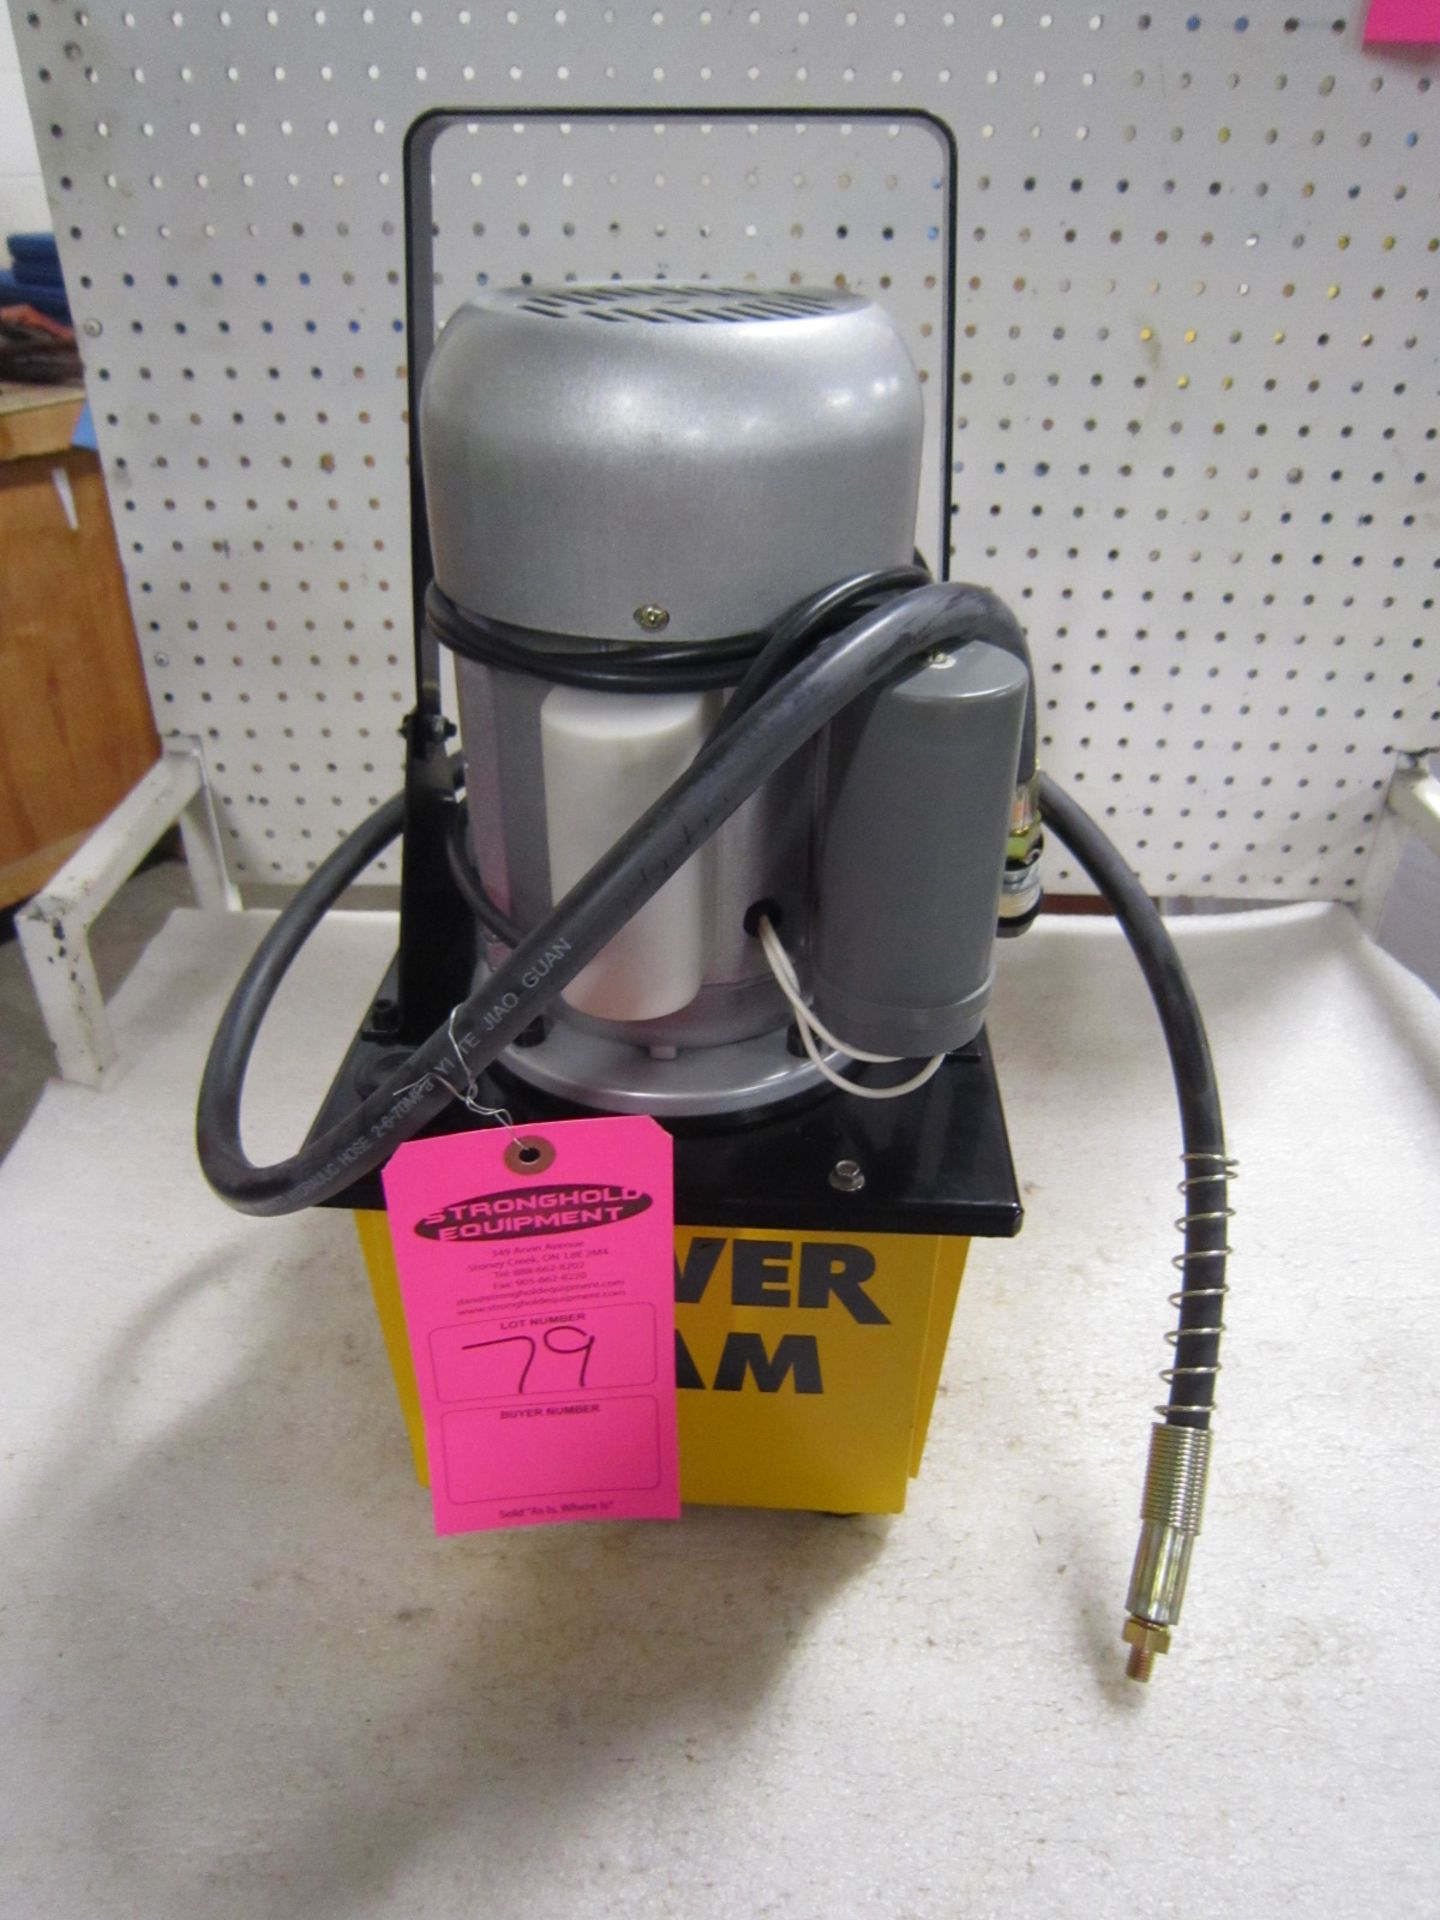 Power Team Hydraulics Electric Powerpack type - 120V single phase hydraulic pump - UNUSED & MINT